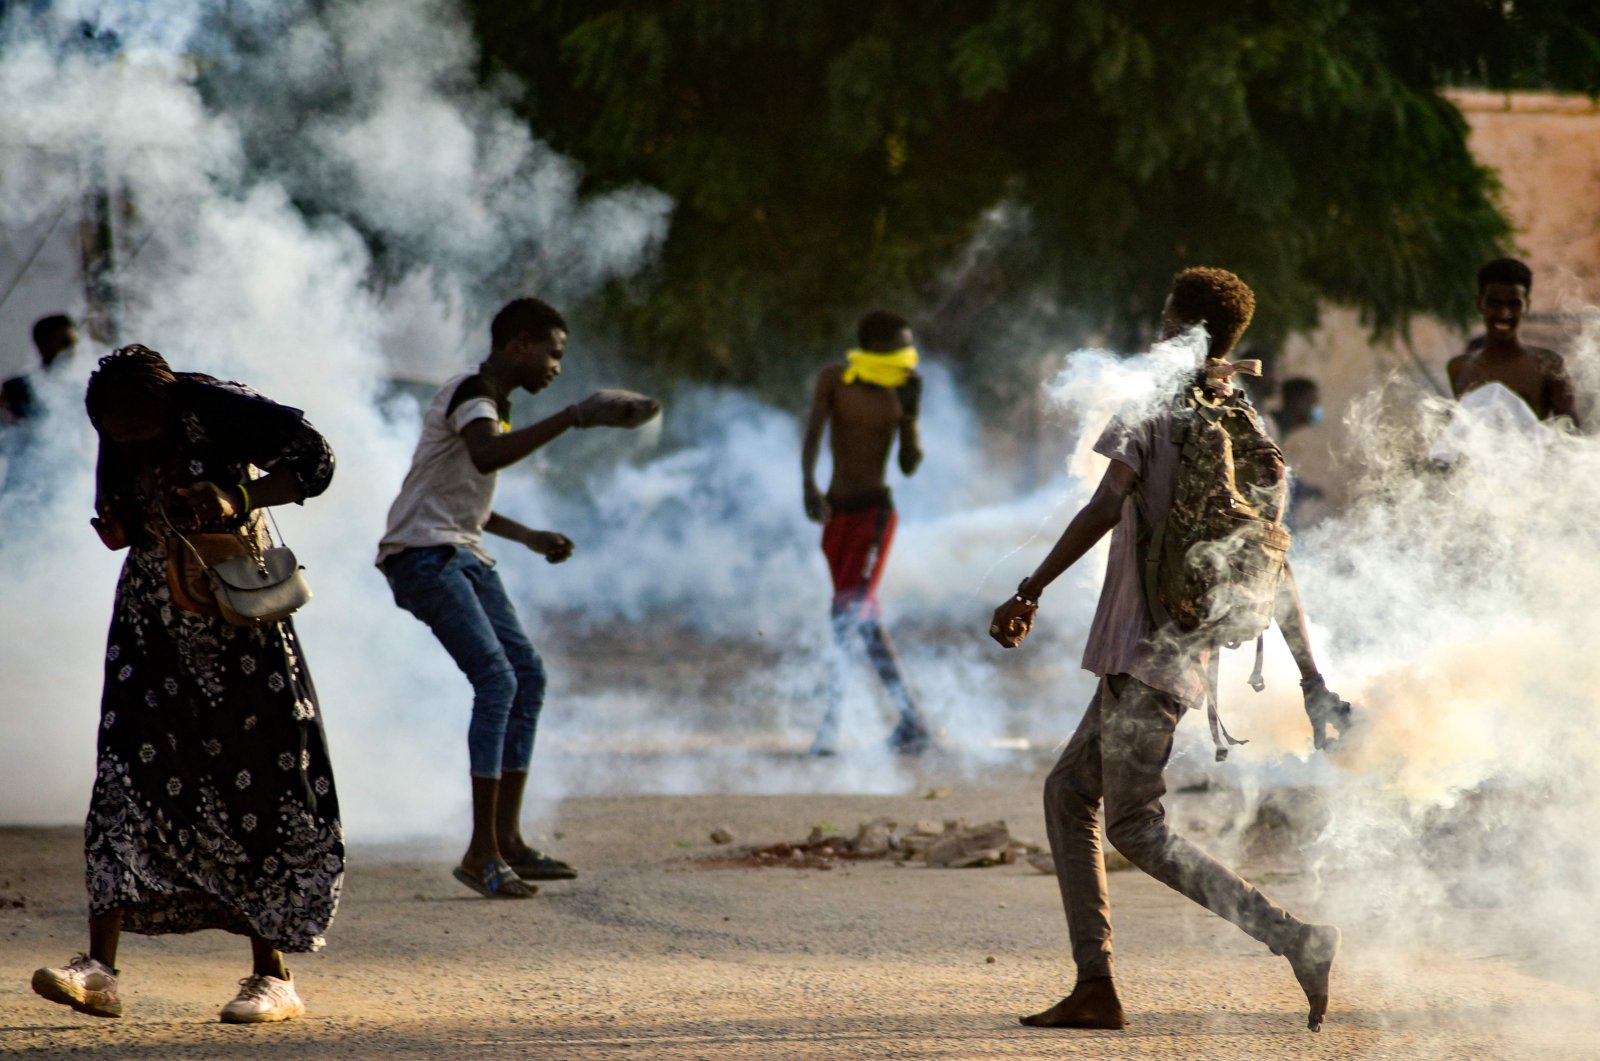 Sudanese youths confront security forces amidst tear gas fired by them to disperse protesters in the capital Khartoum amid ongoing demonstrations against a military takeover that has sparked widespread international condemnation, Khartoum, Sudan, Oct. 27, 2021. (AFP Photo)